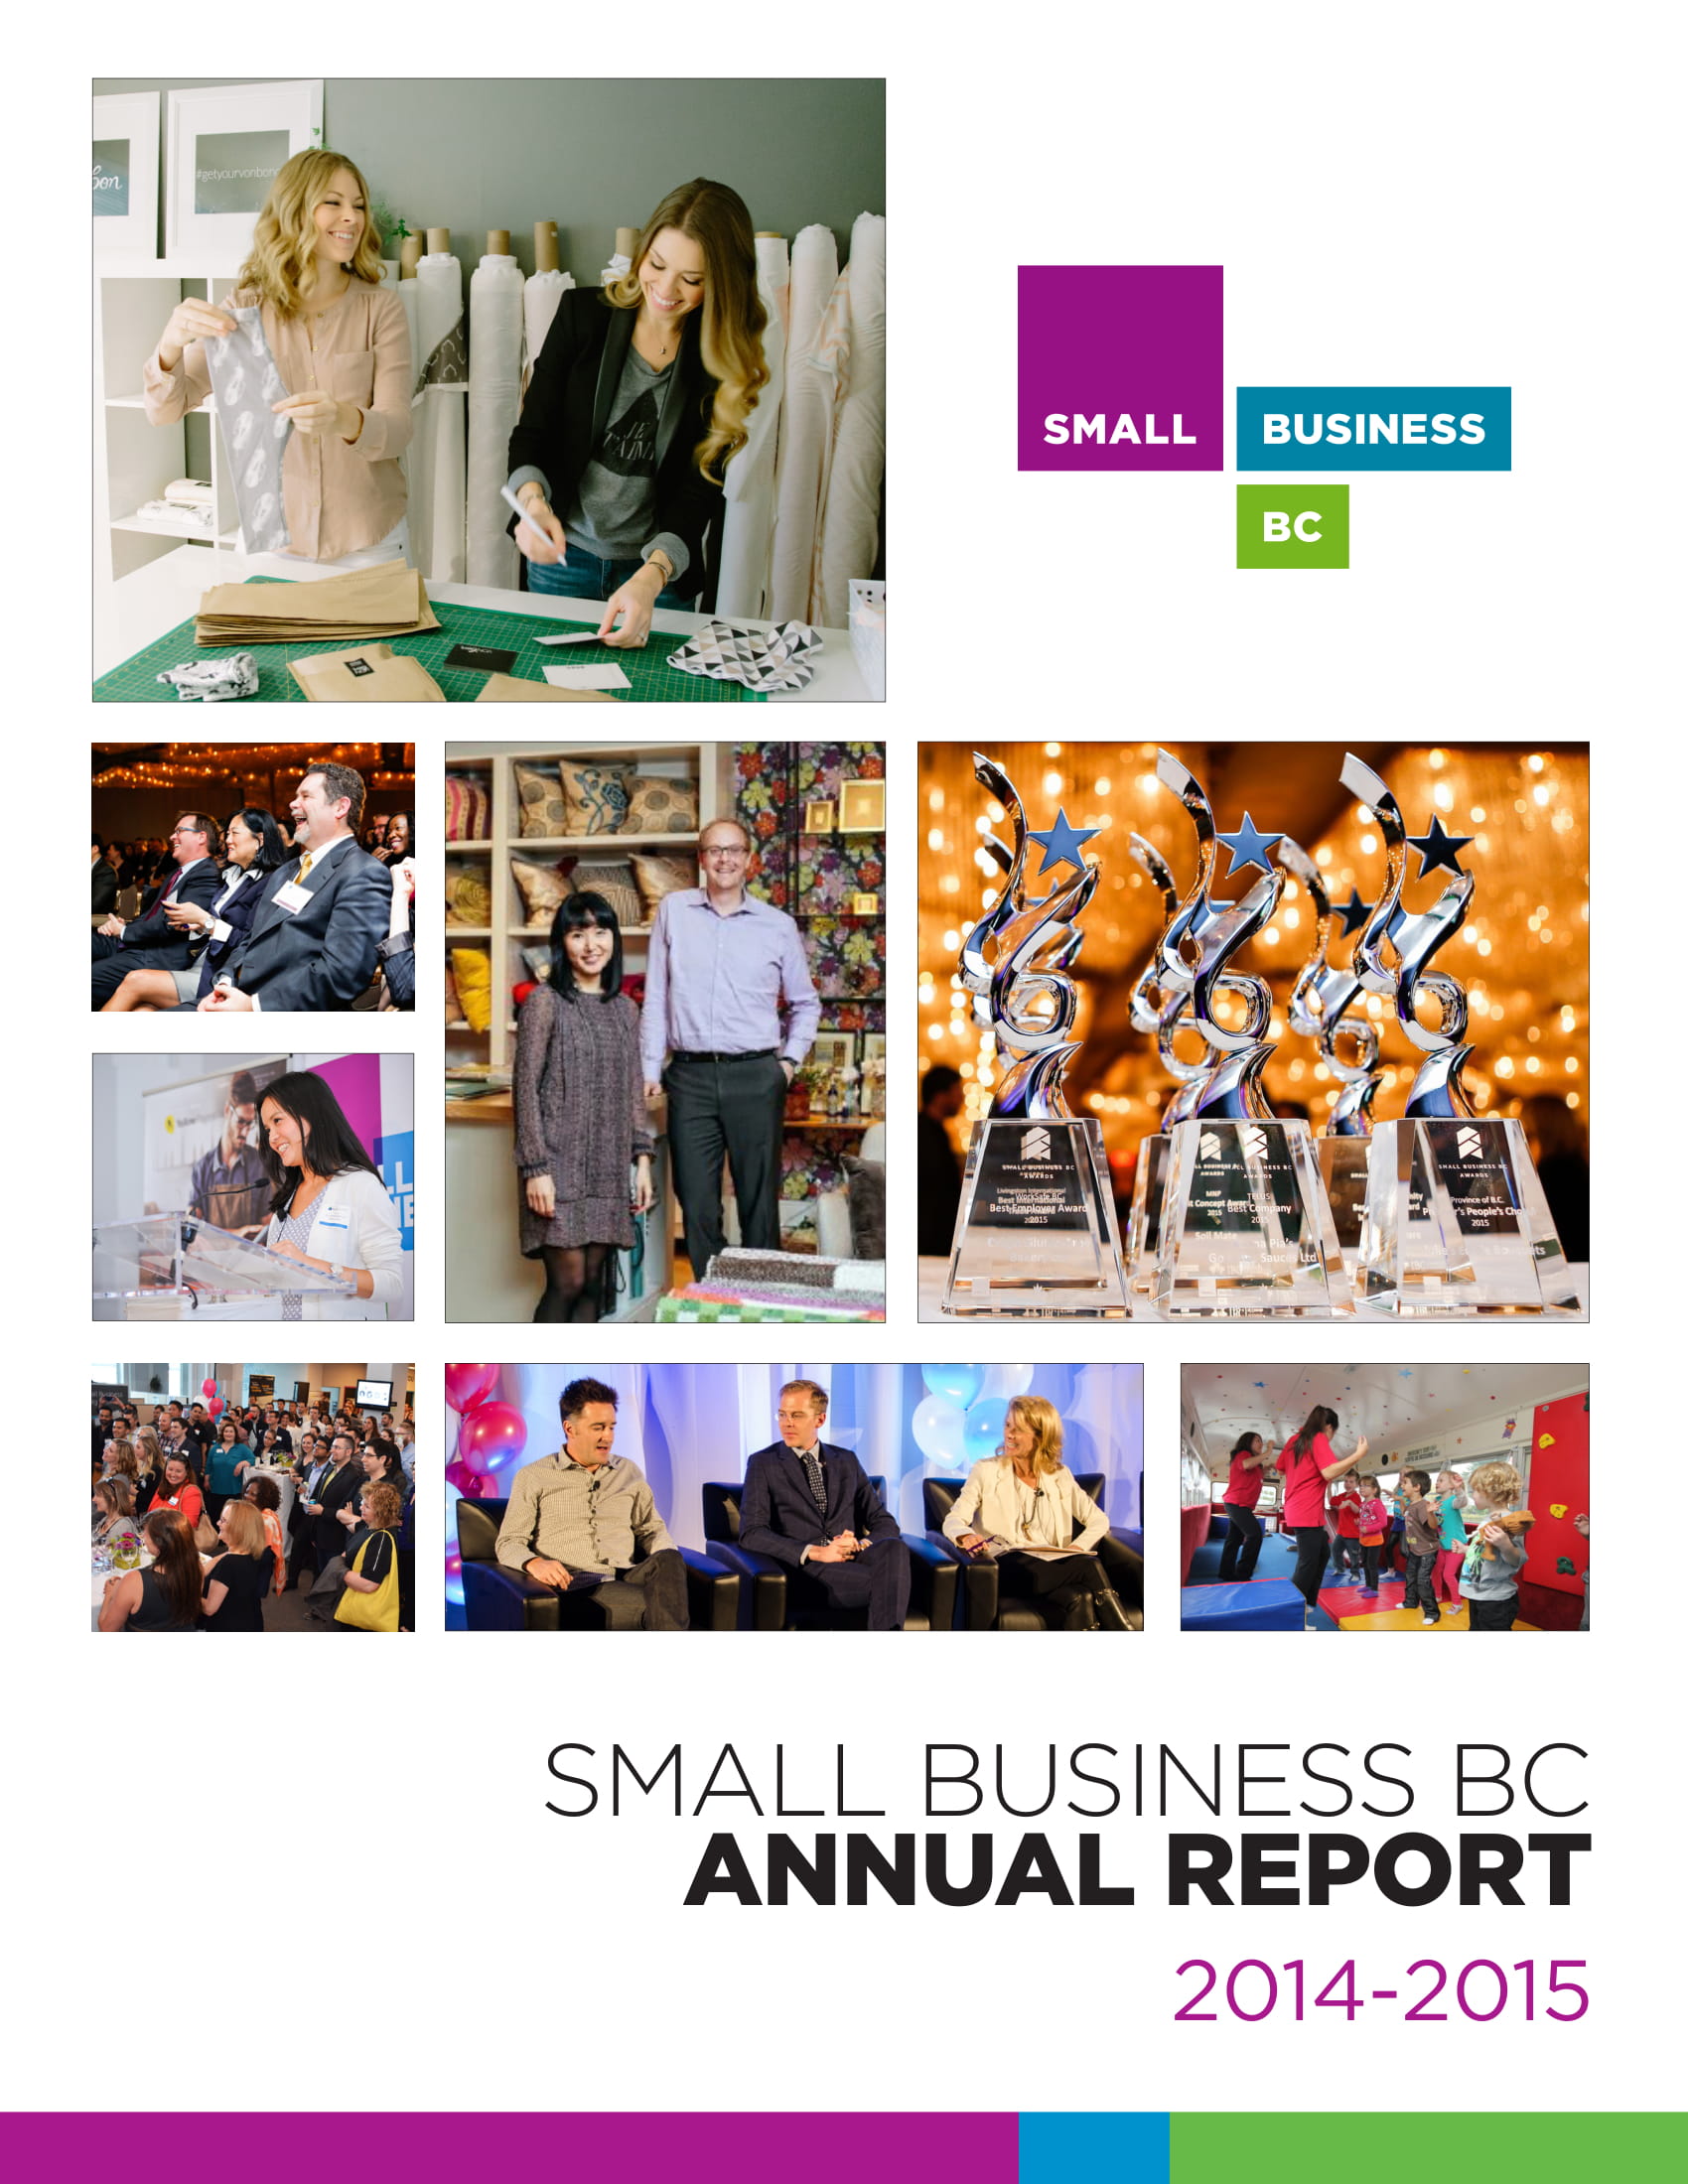 annual financial report for a small business example